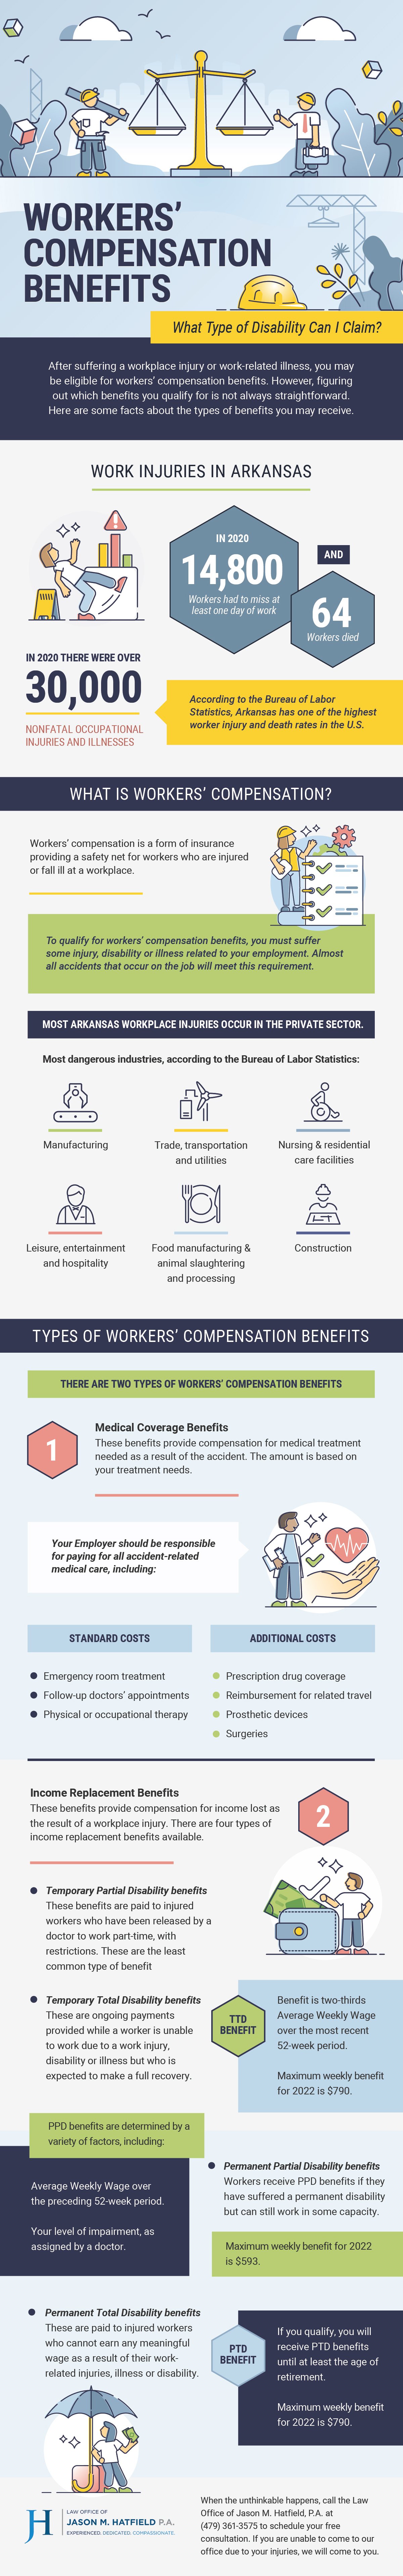 Workers' Compensation Benefits - What Type of Disability Can I Claim?